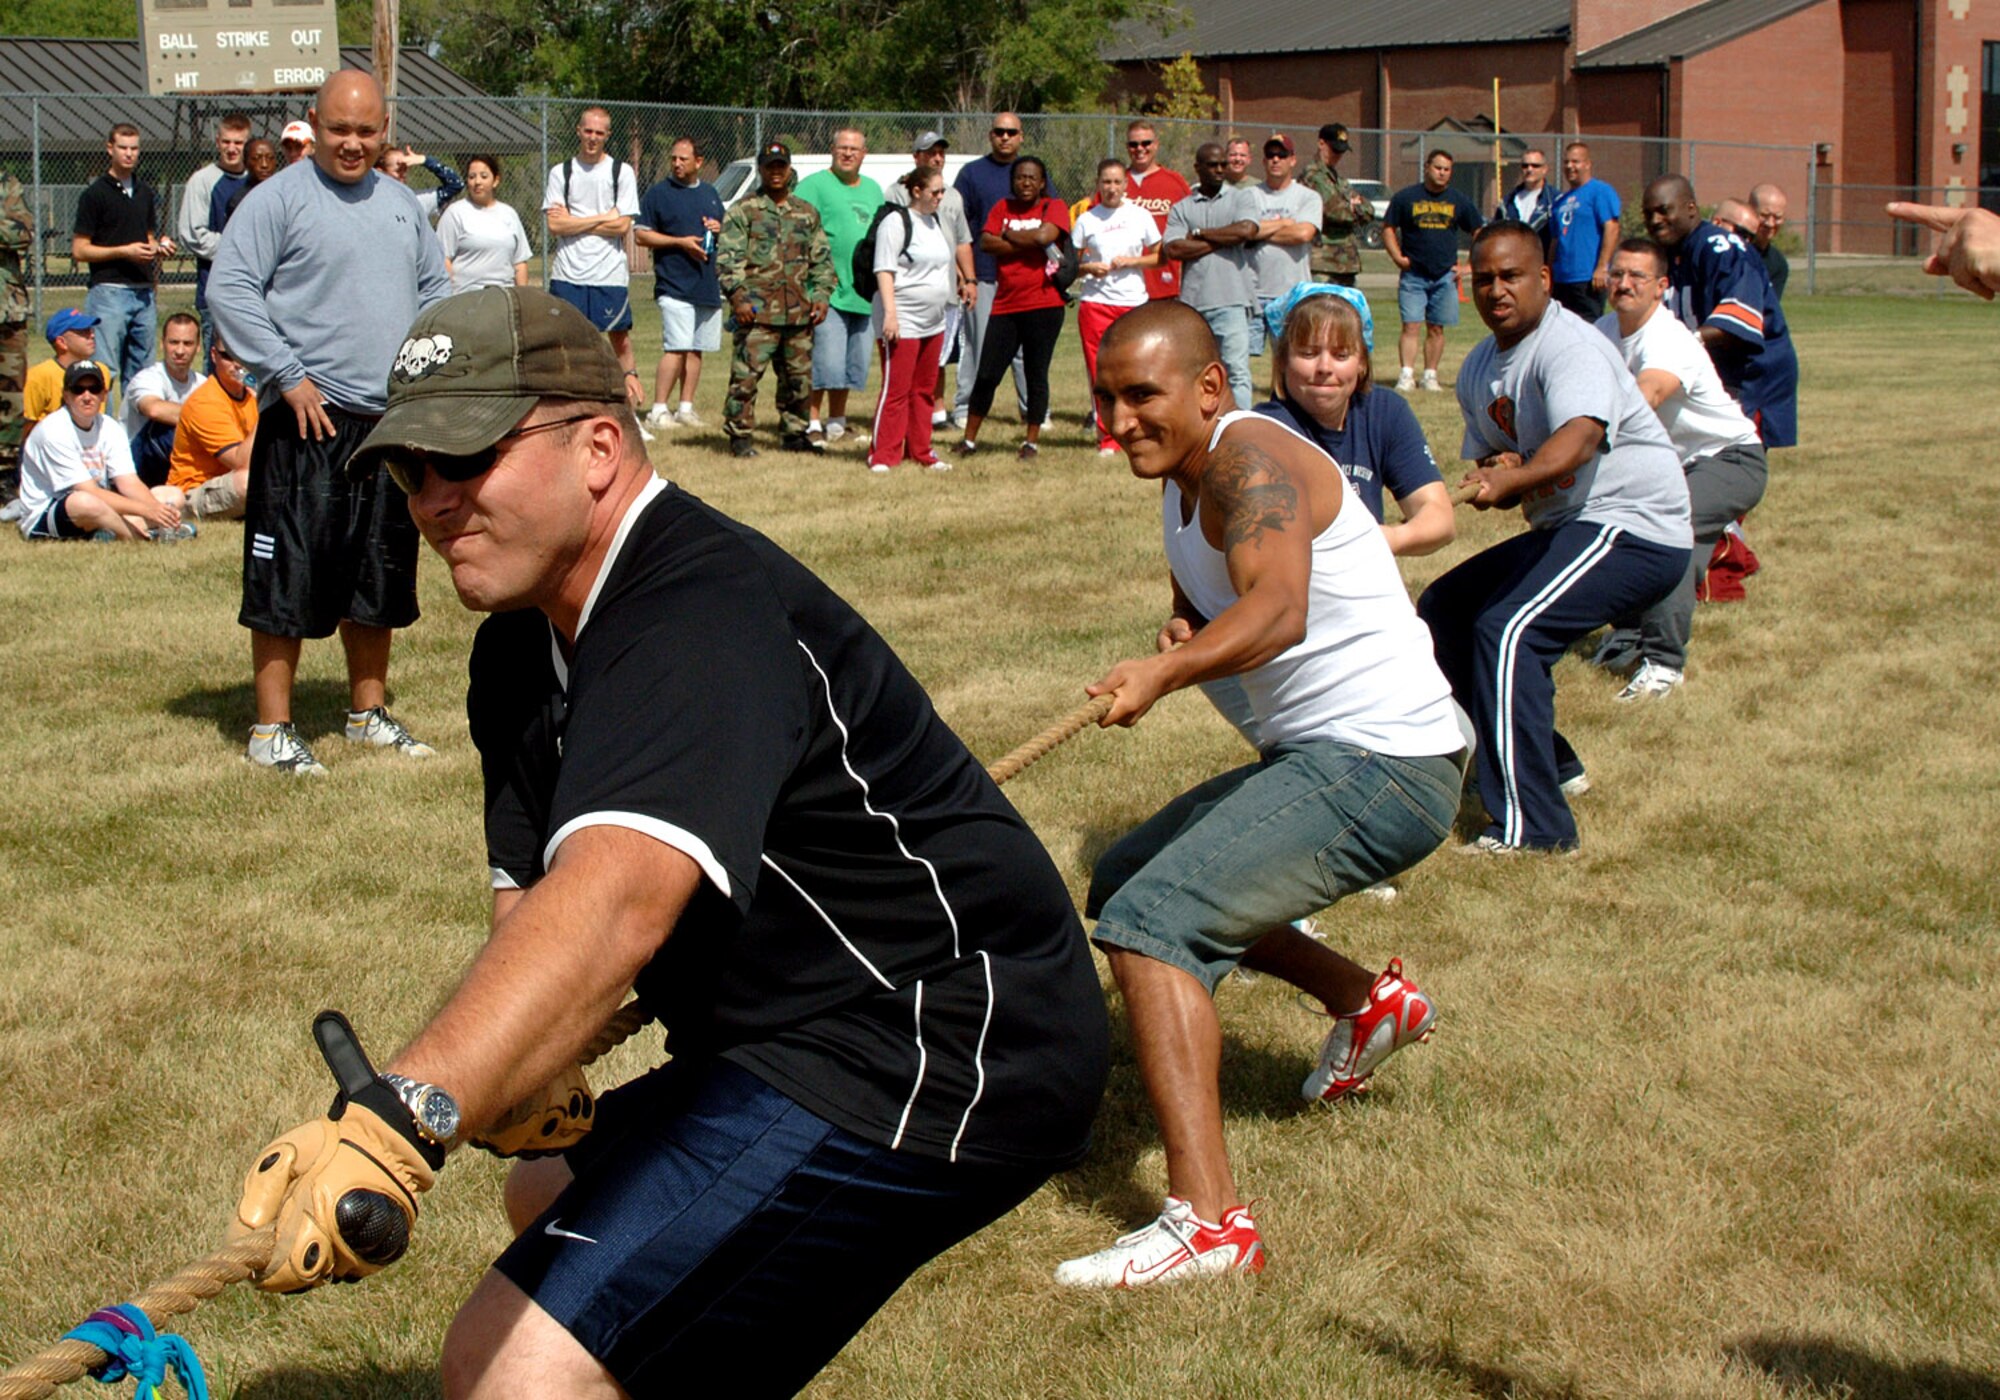 The 319th Communication Squadron's tug-of-war team struggles to pull the flag over the line while competing during this year's Summer Bash. In the end, the comm. team was only defeating by the 319th Civil Engineer Squadron, winning second place. (U.S. Air Force photo/Senior Airman SerMae Lampkin)